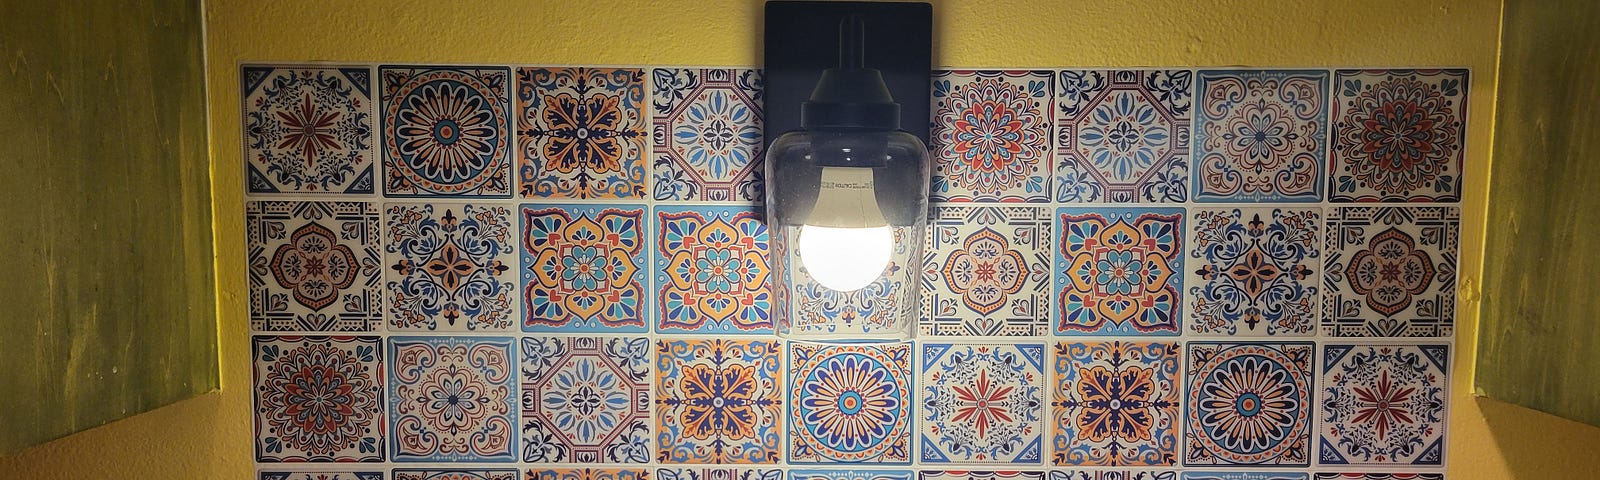 kitchen sink with tiles on the wall, every tile has a different geometric design